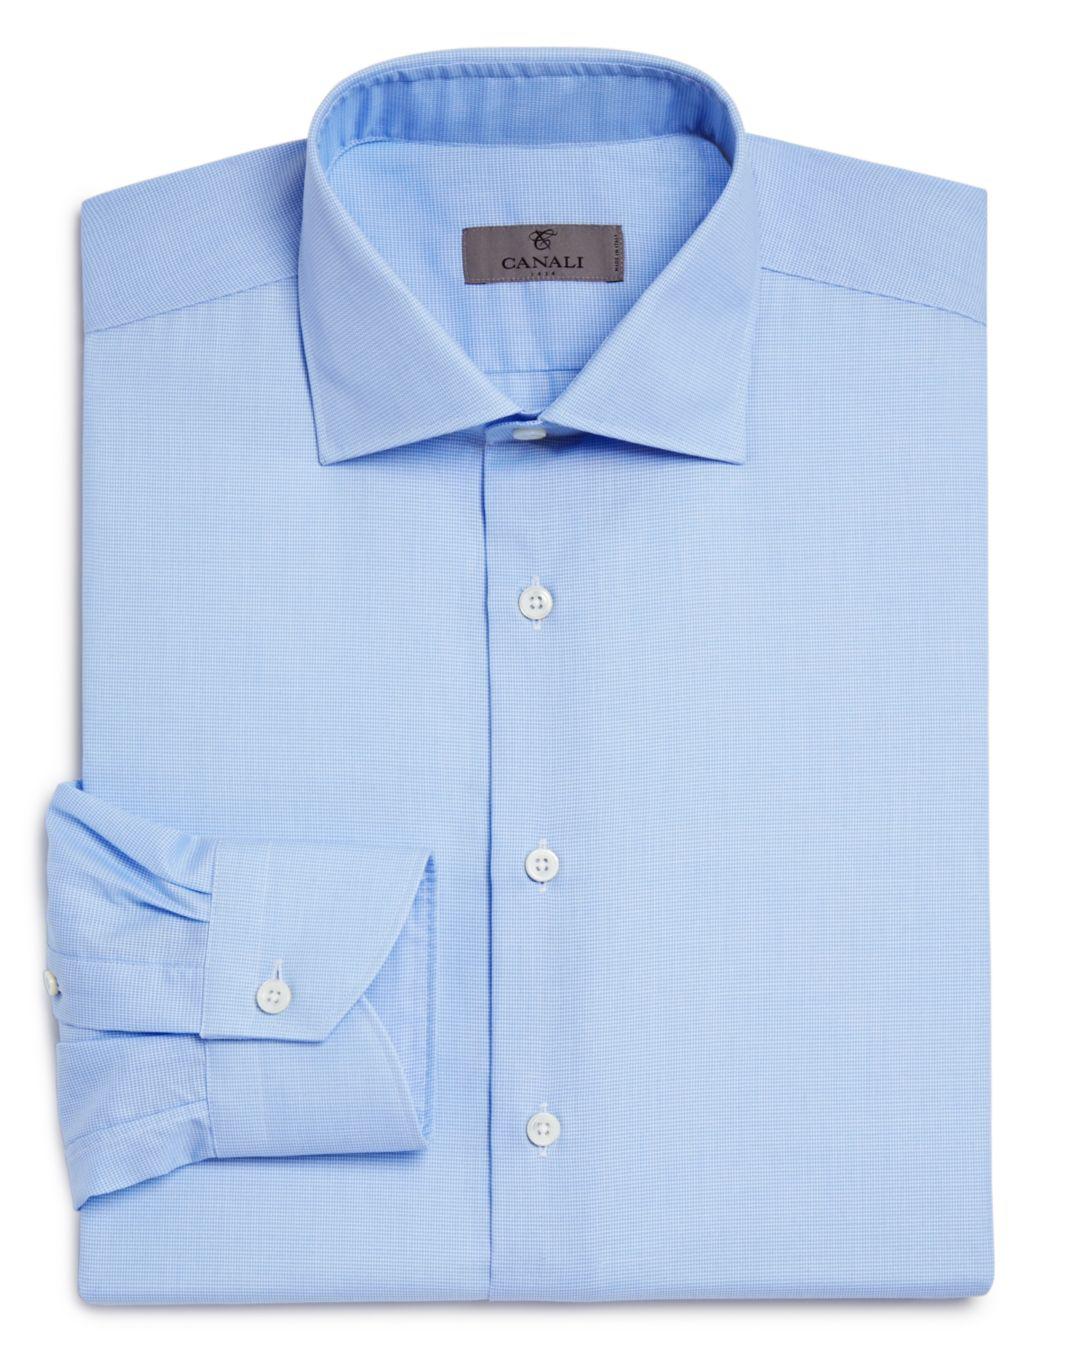 Canali Cotton Crosshatch Textured Solid Regular Fit Dress Shirt in ...